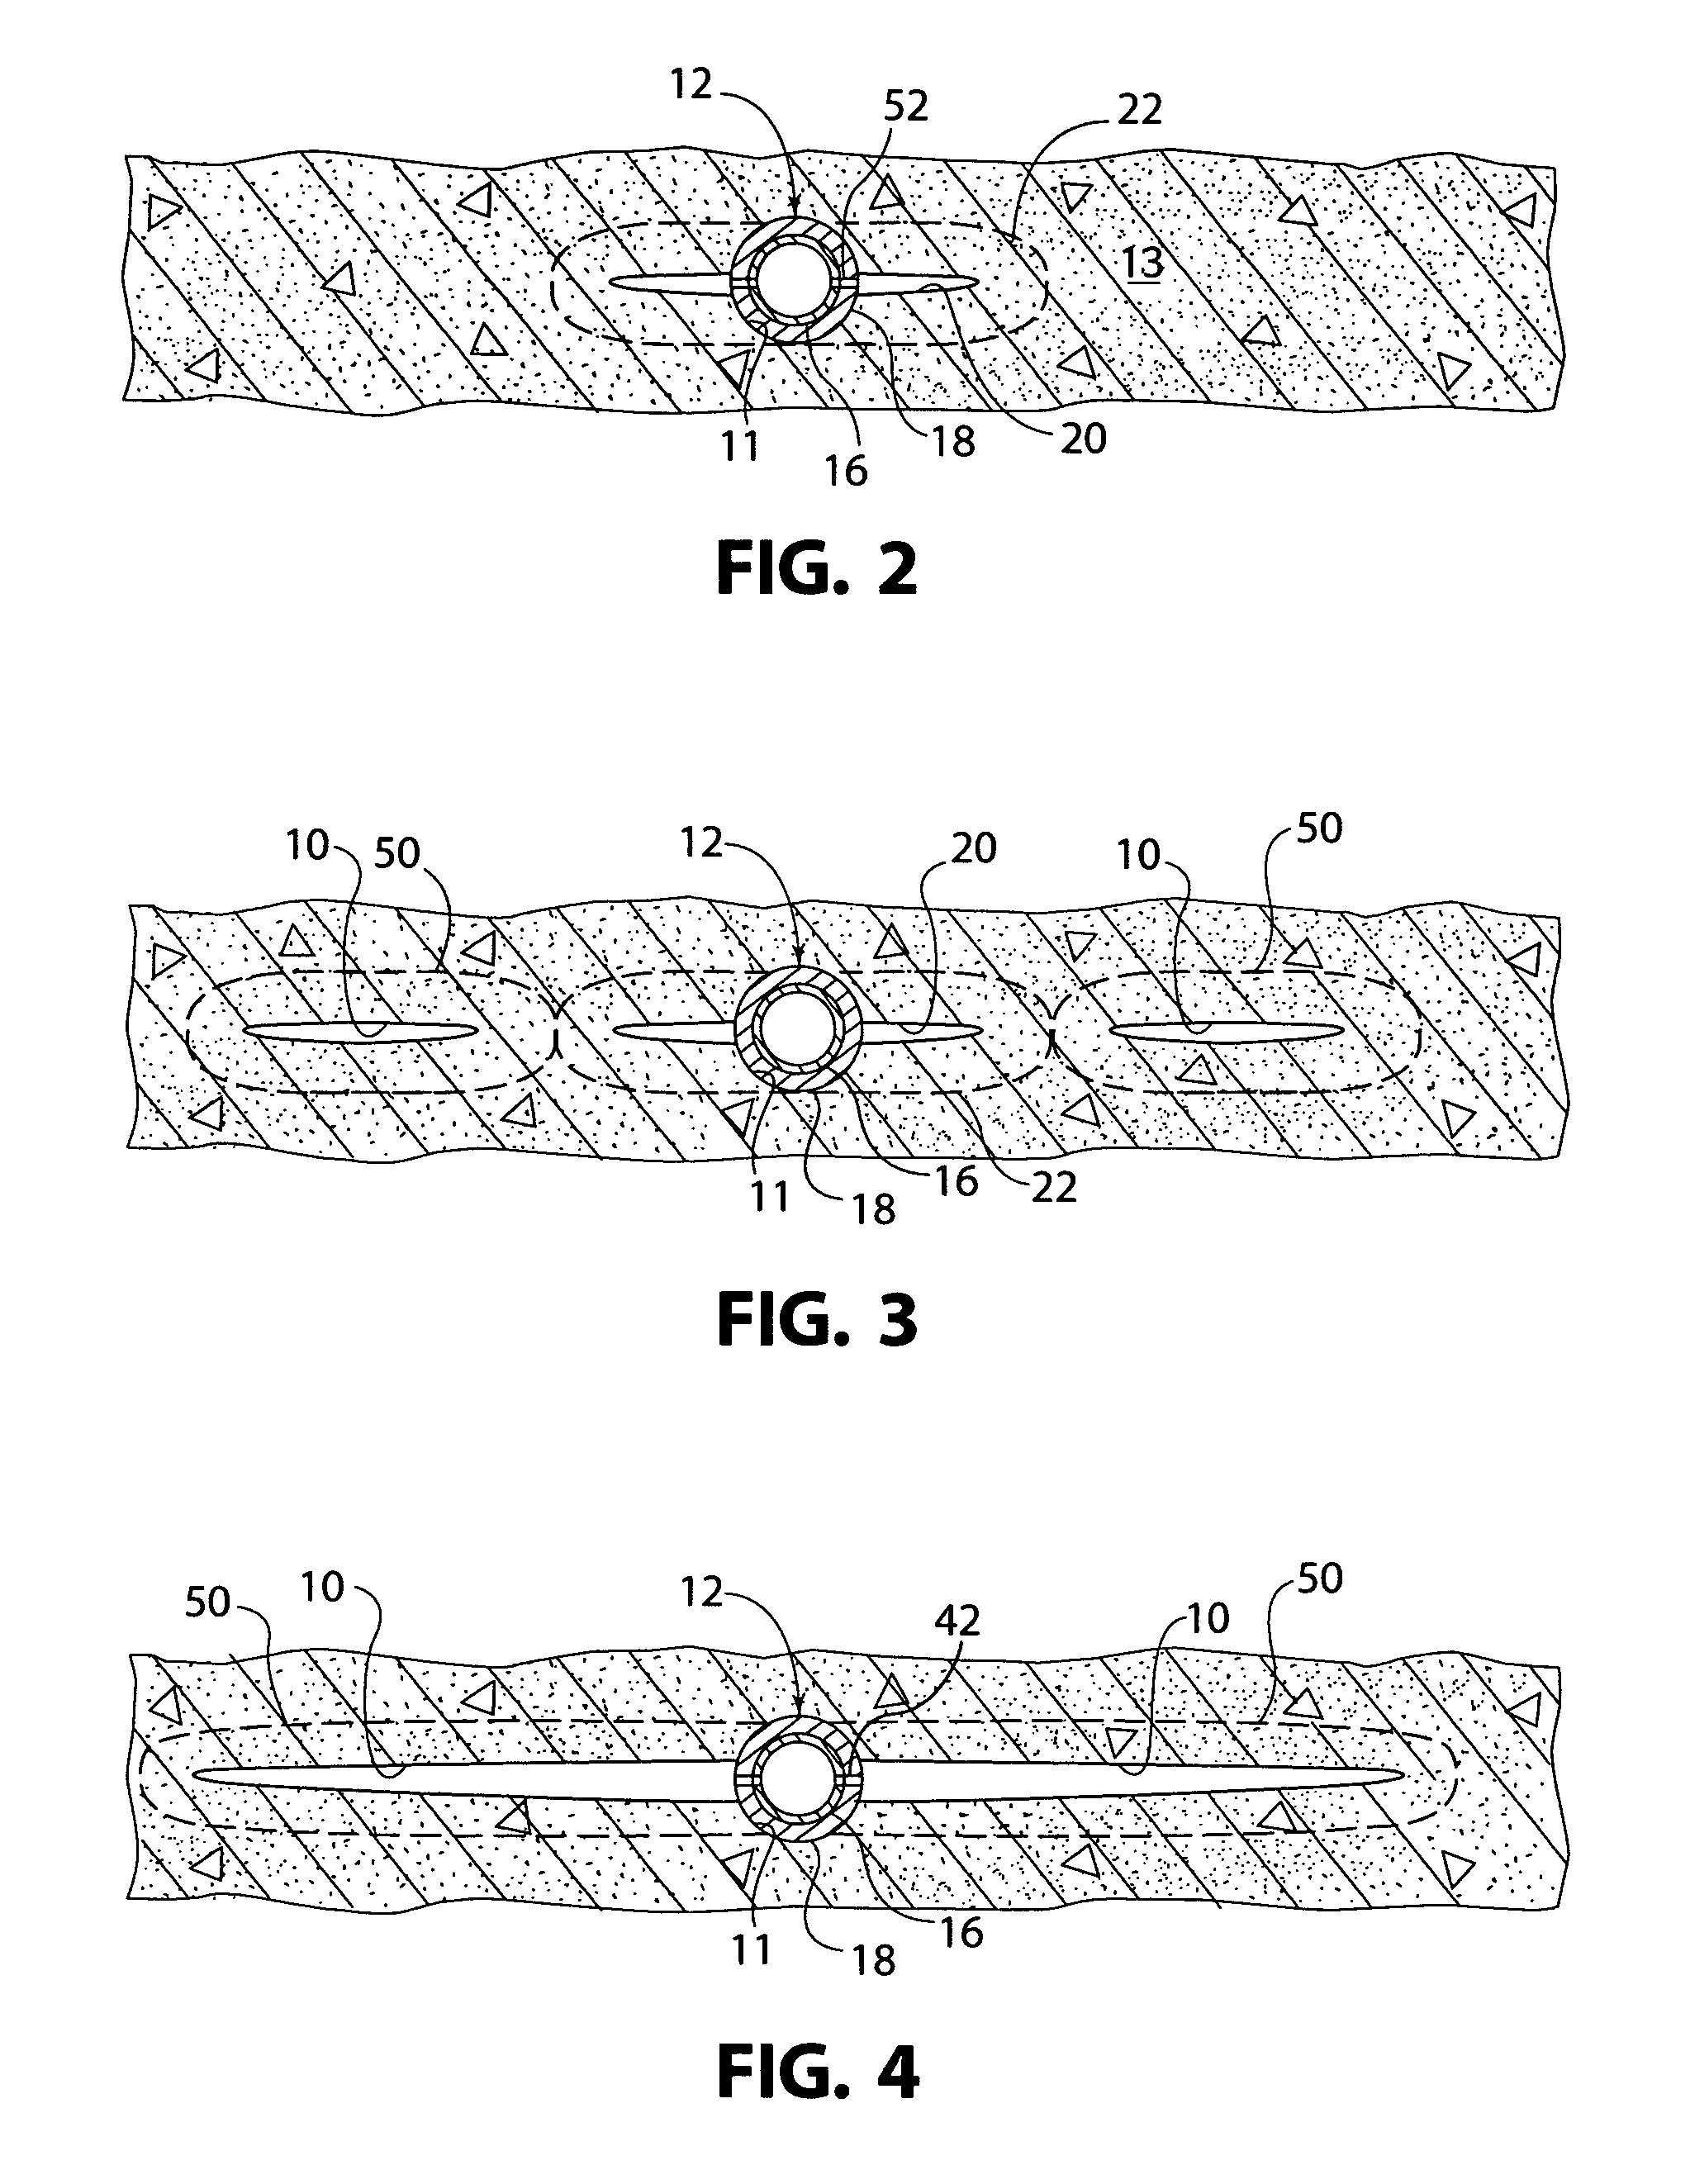 Method for increasing fracture penetration into target formation